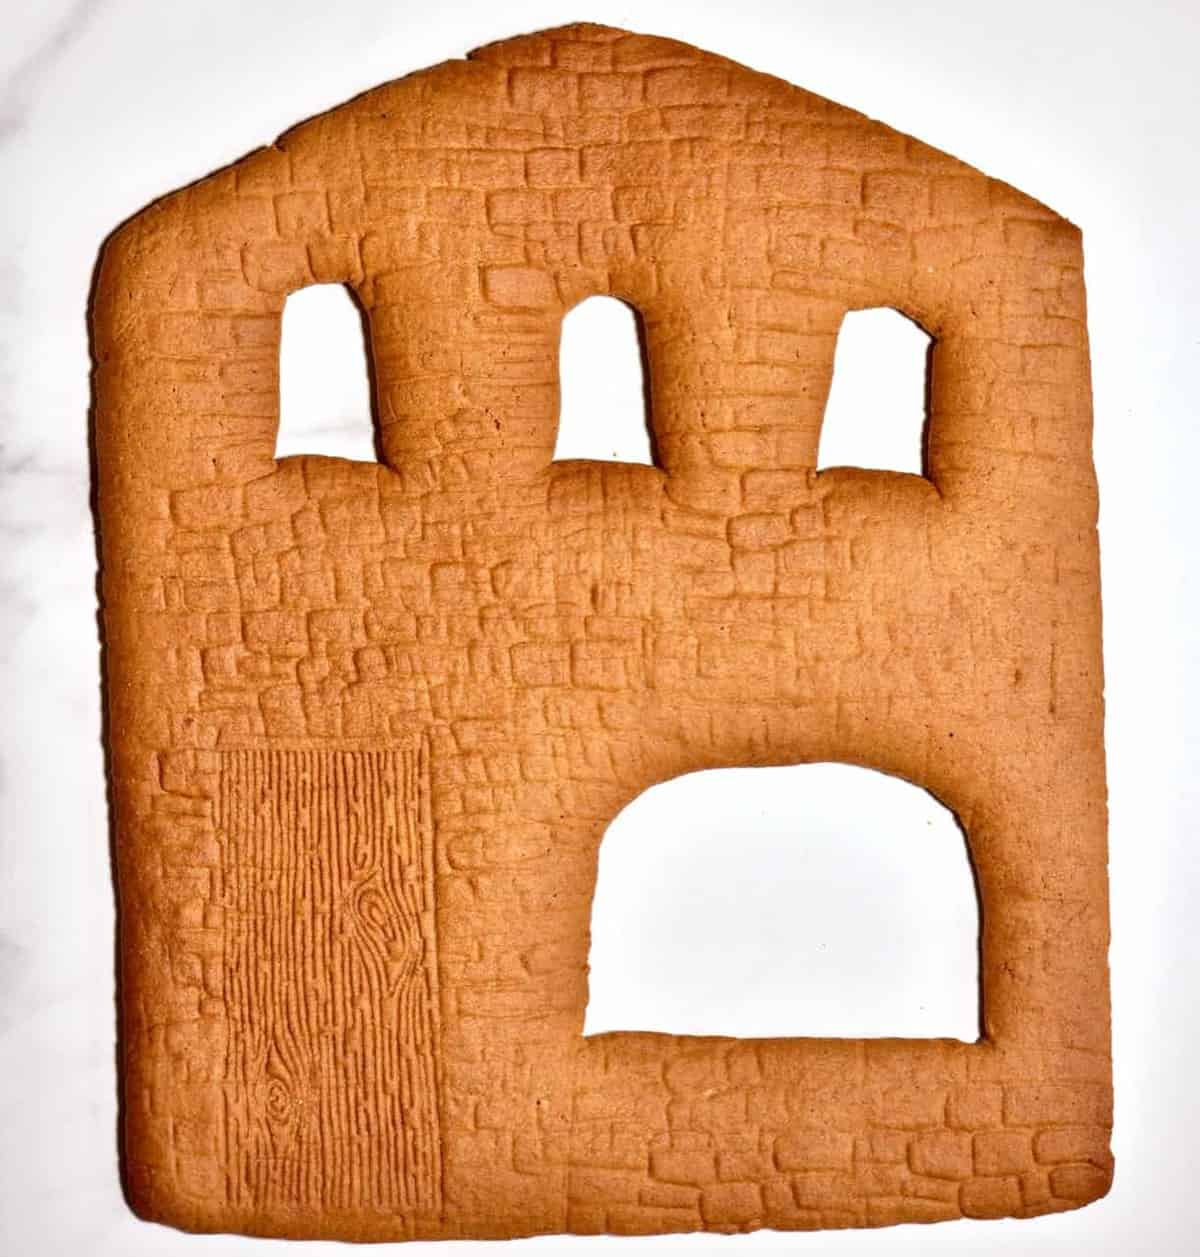 baked gingerbread house wall with cut off windows 